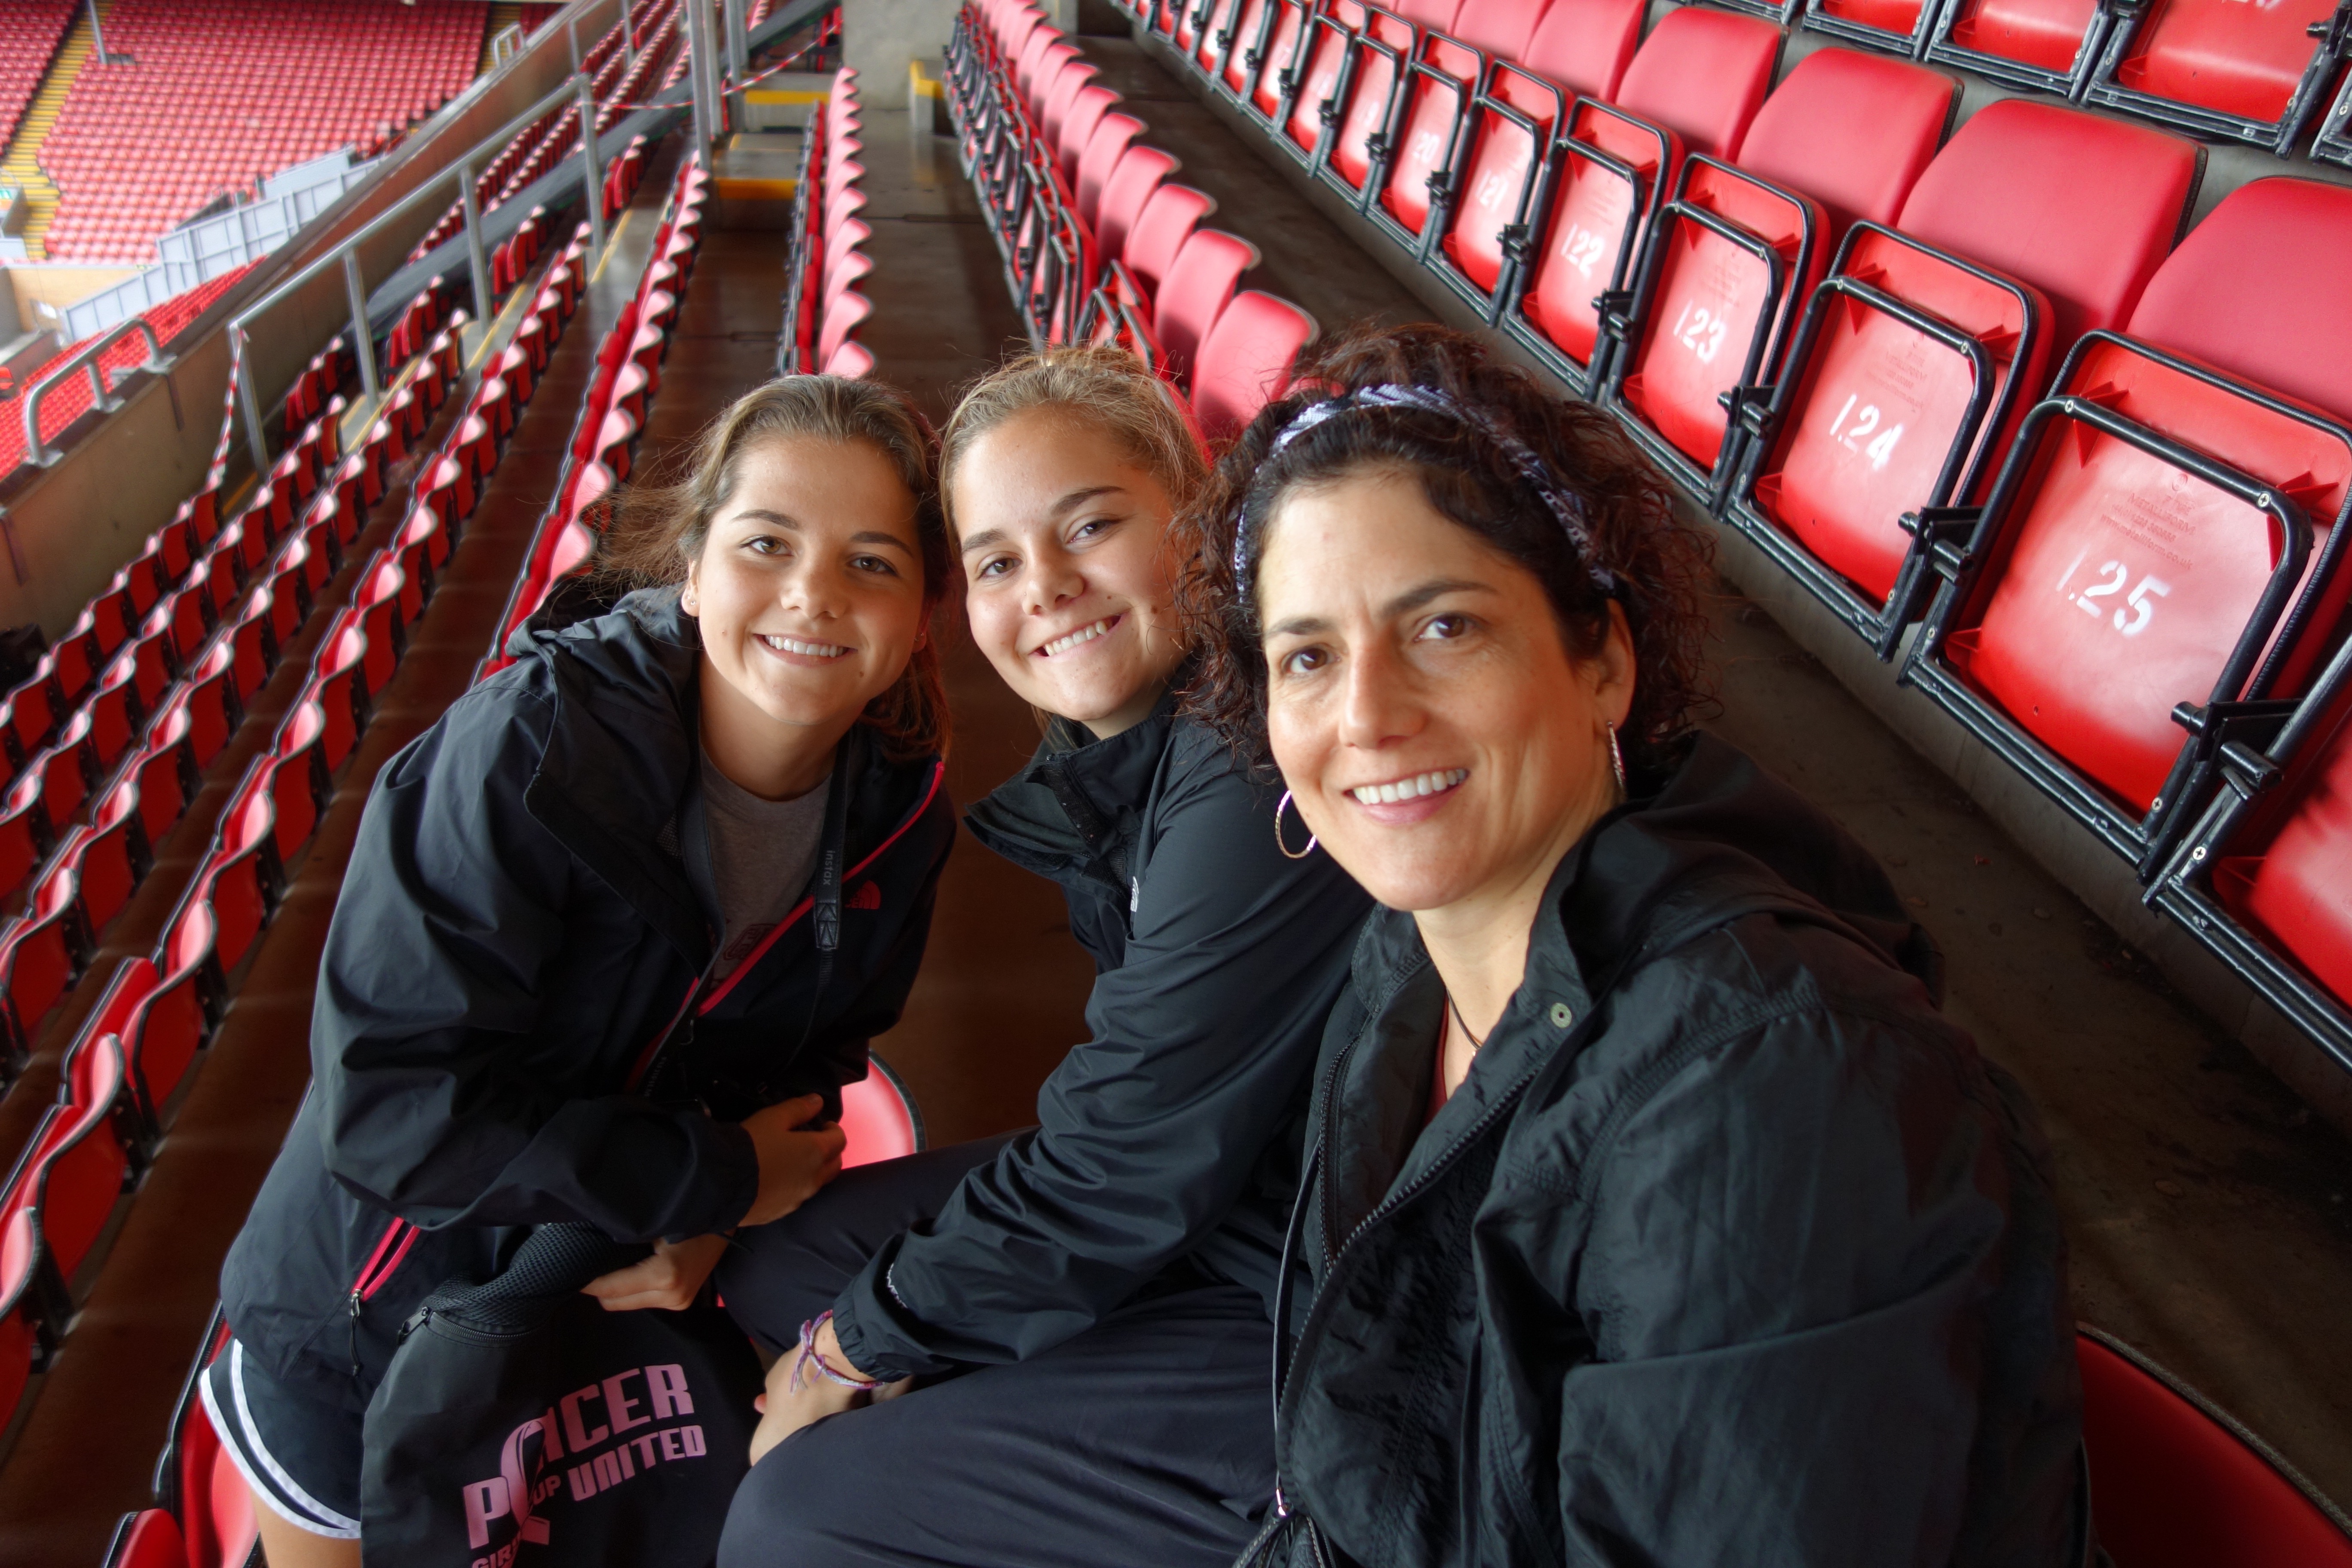 Photo: In the stands at Anfield (home of Liverpool Football Club)